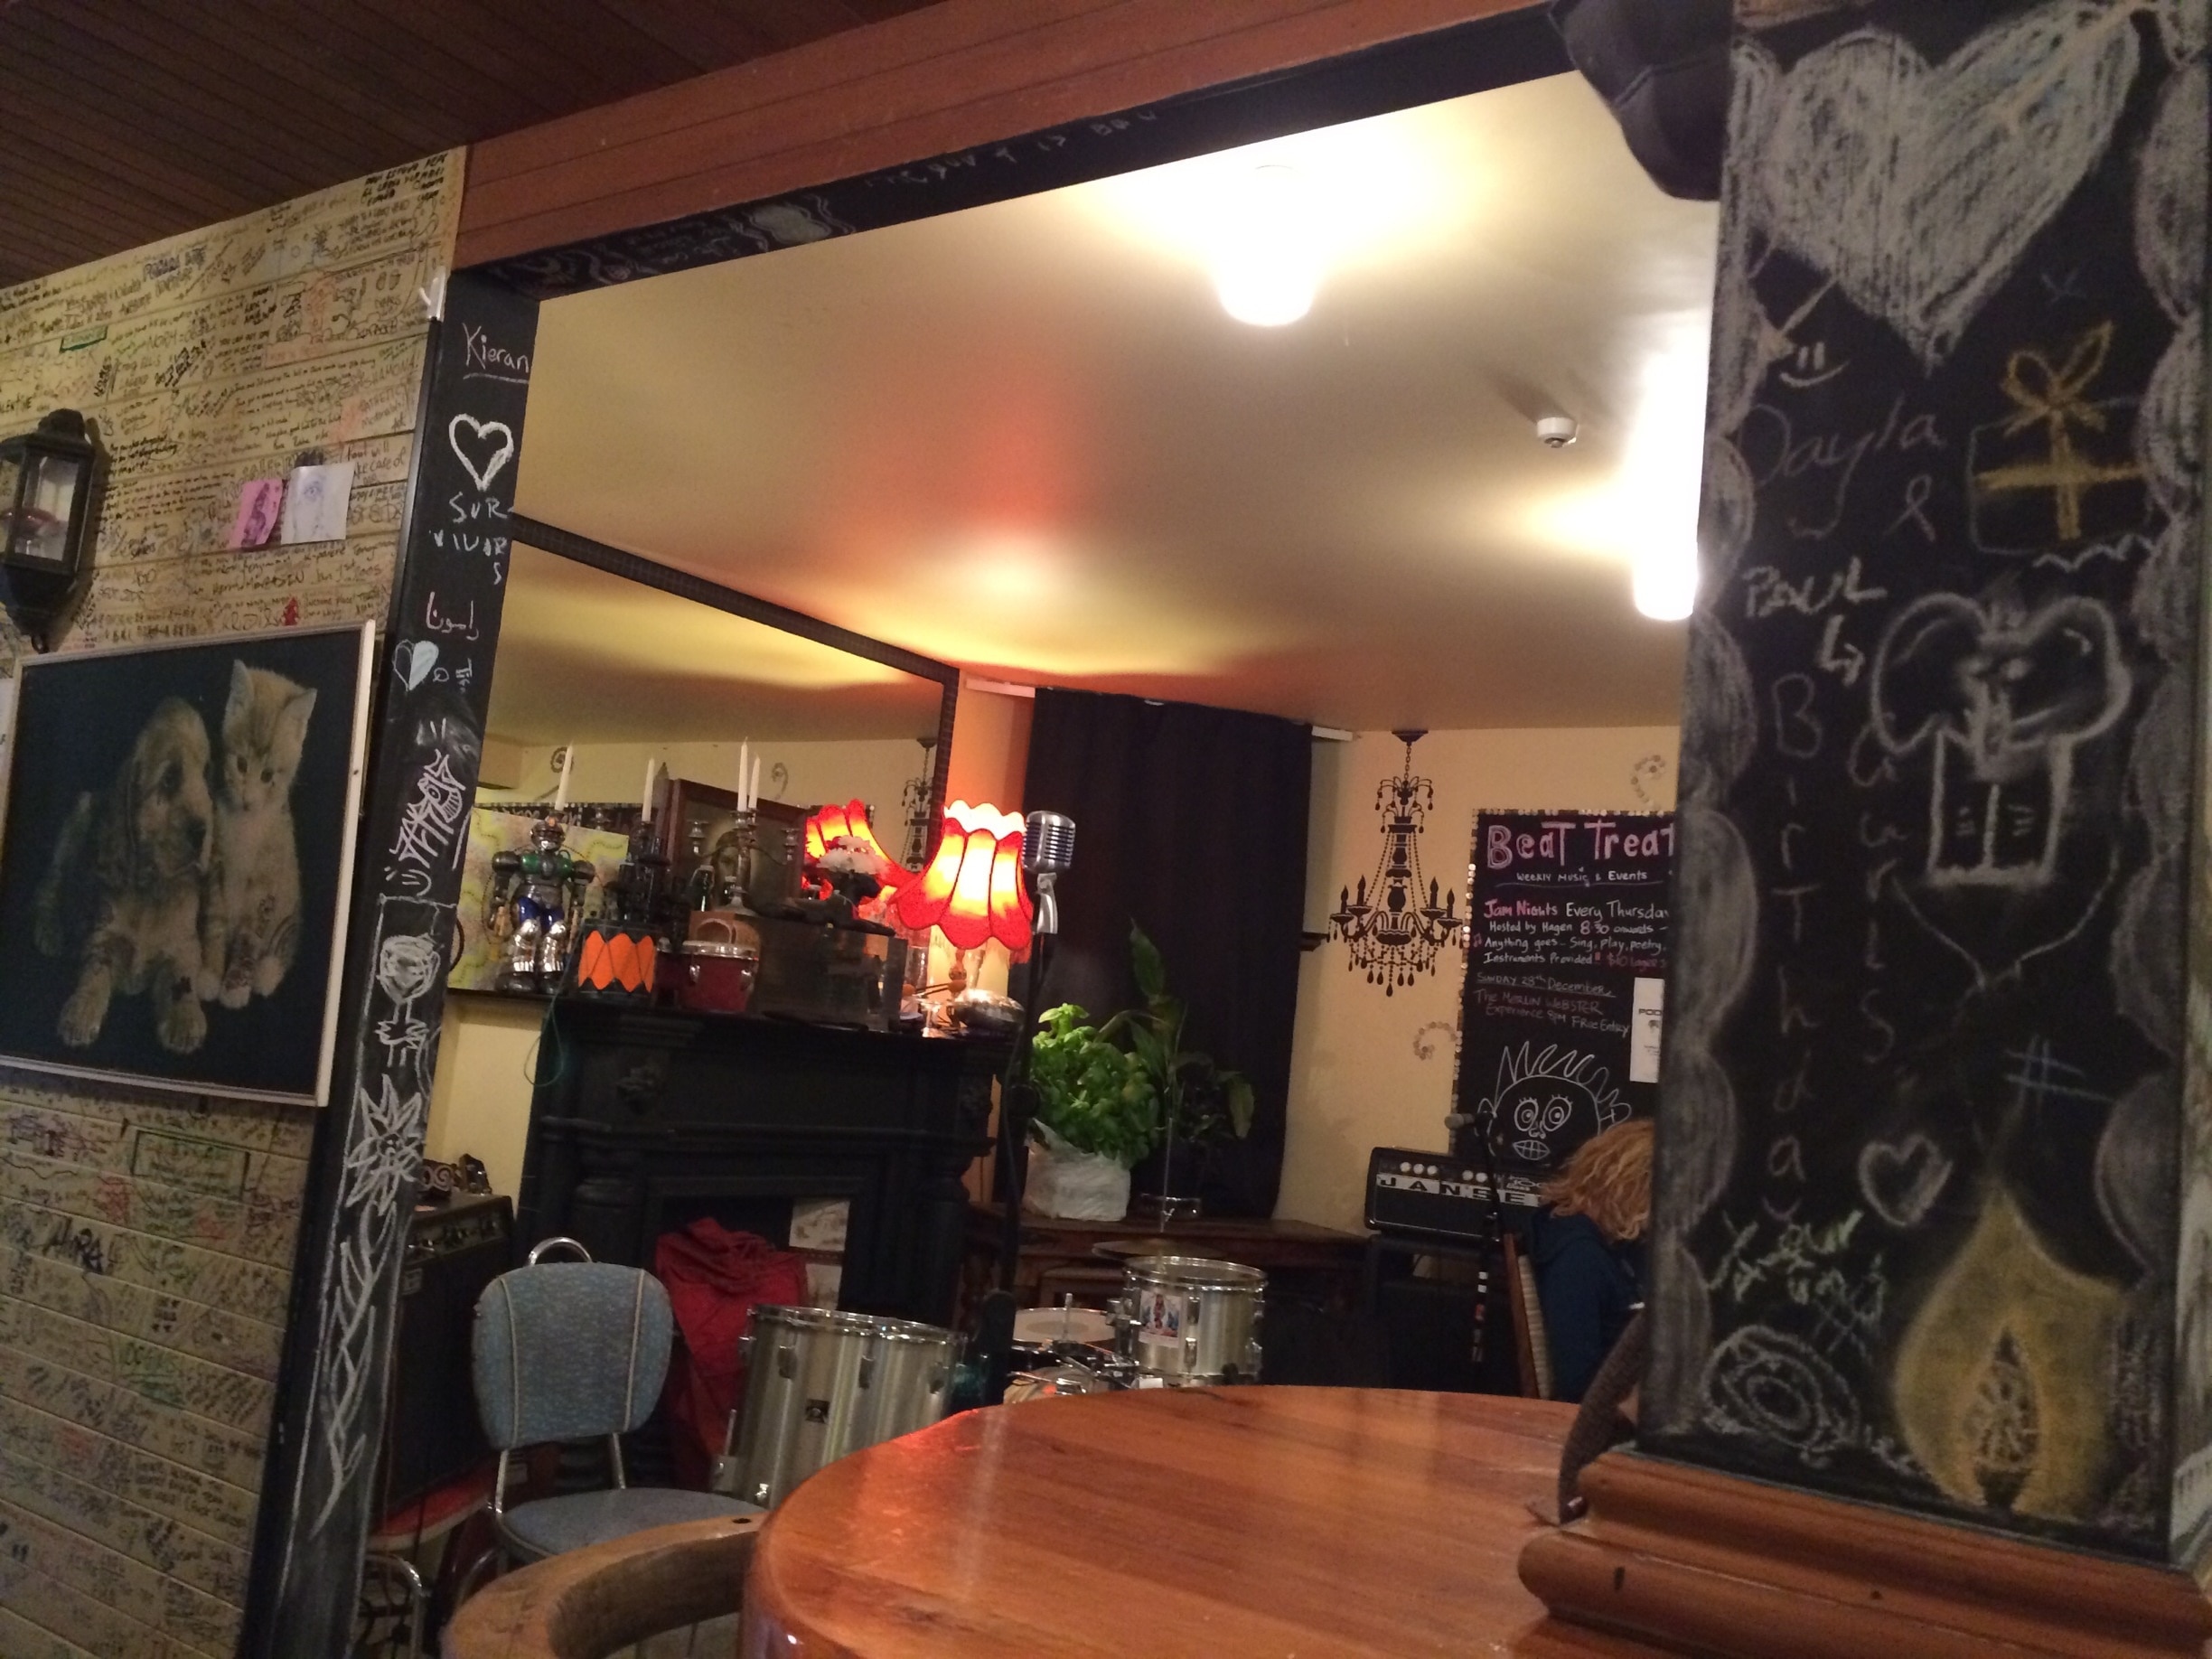 East st cafe & bar. Funky as vegeterian joint under back packers. The plant in corner is a huge basil 